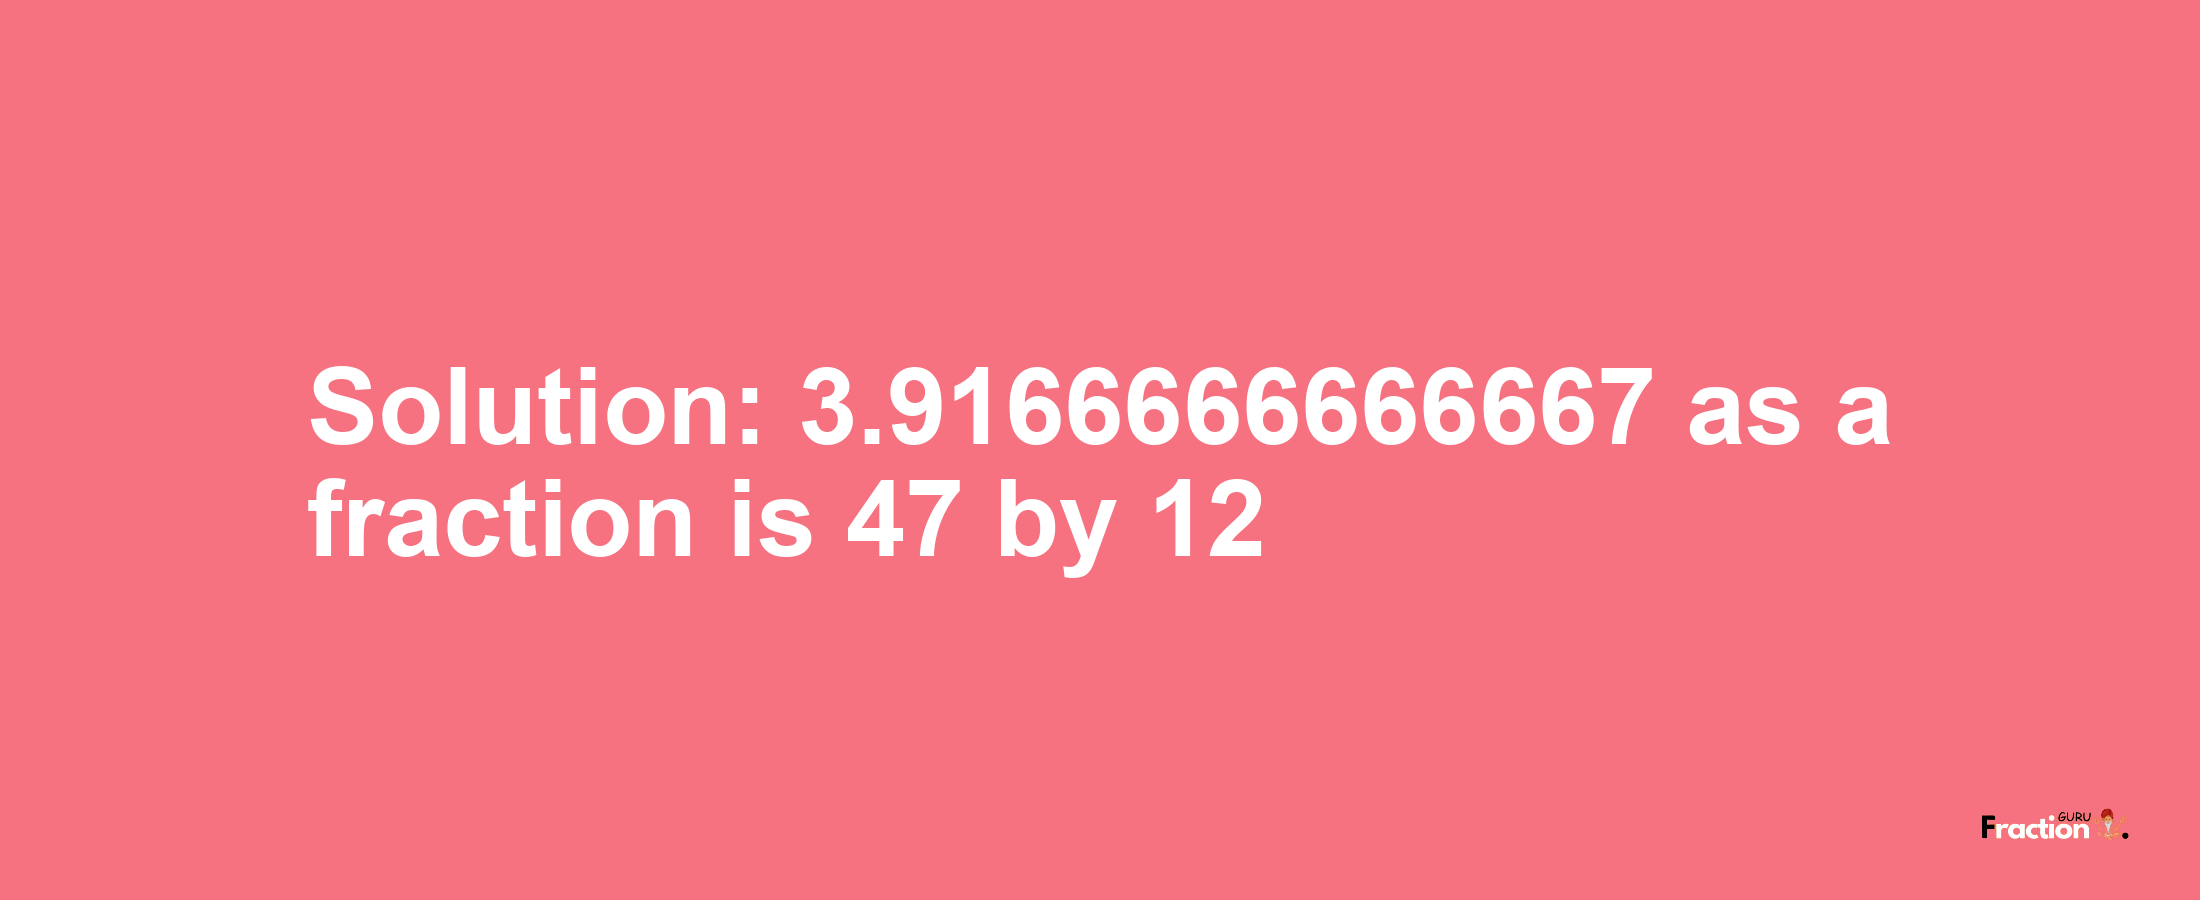 Solution:3.9166666666667 as a fraction is 47/12